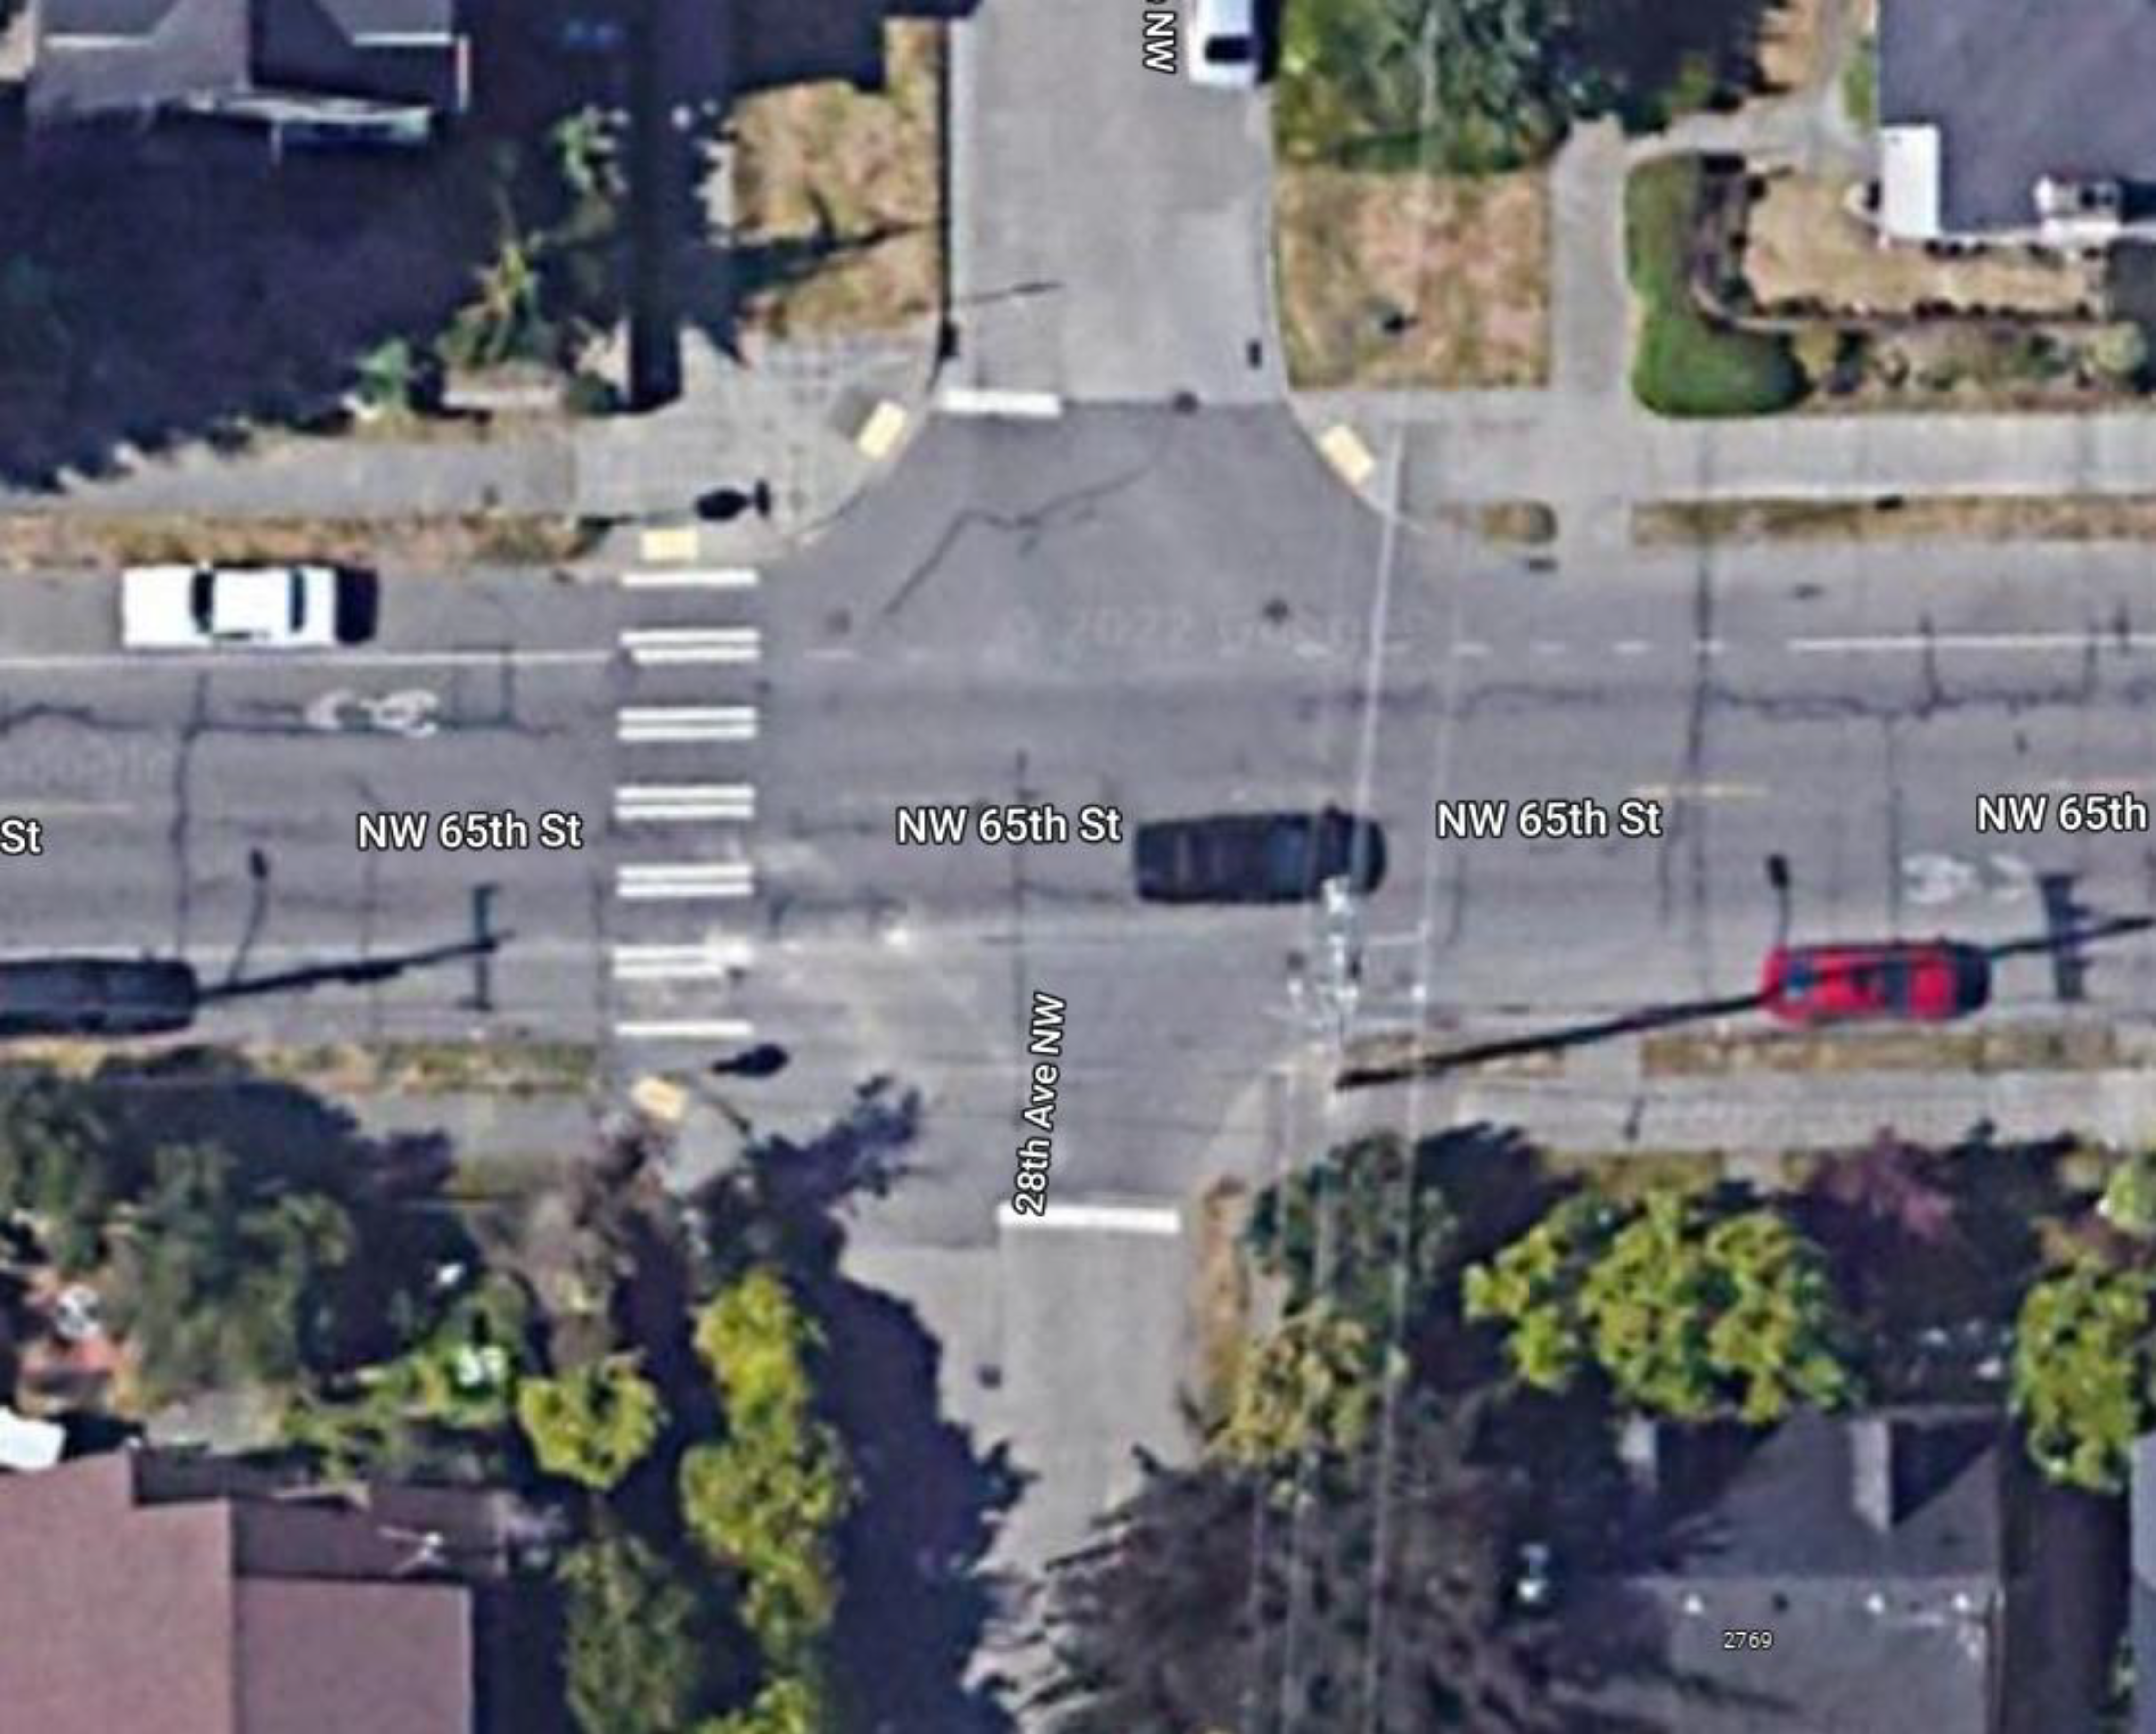 Satellite image of NW 65th St & 28th Ave NW intersection showing where new pavement markings will go